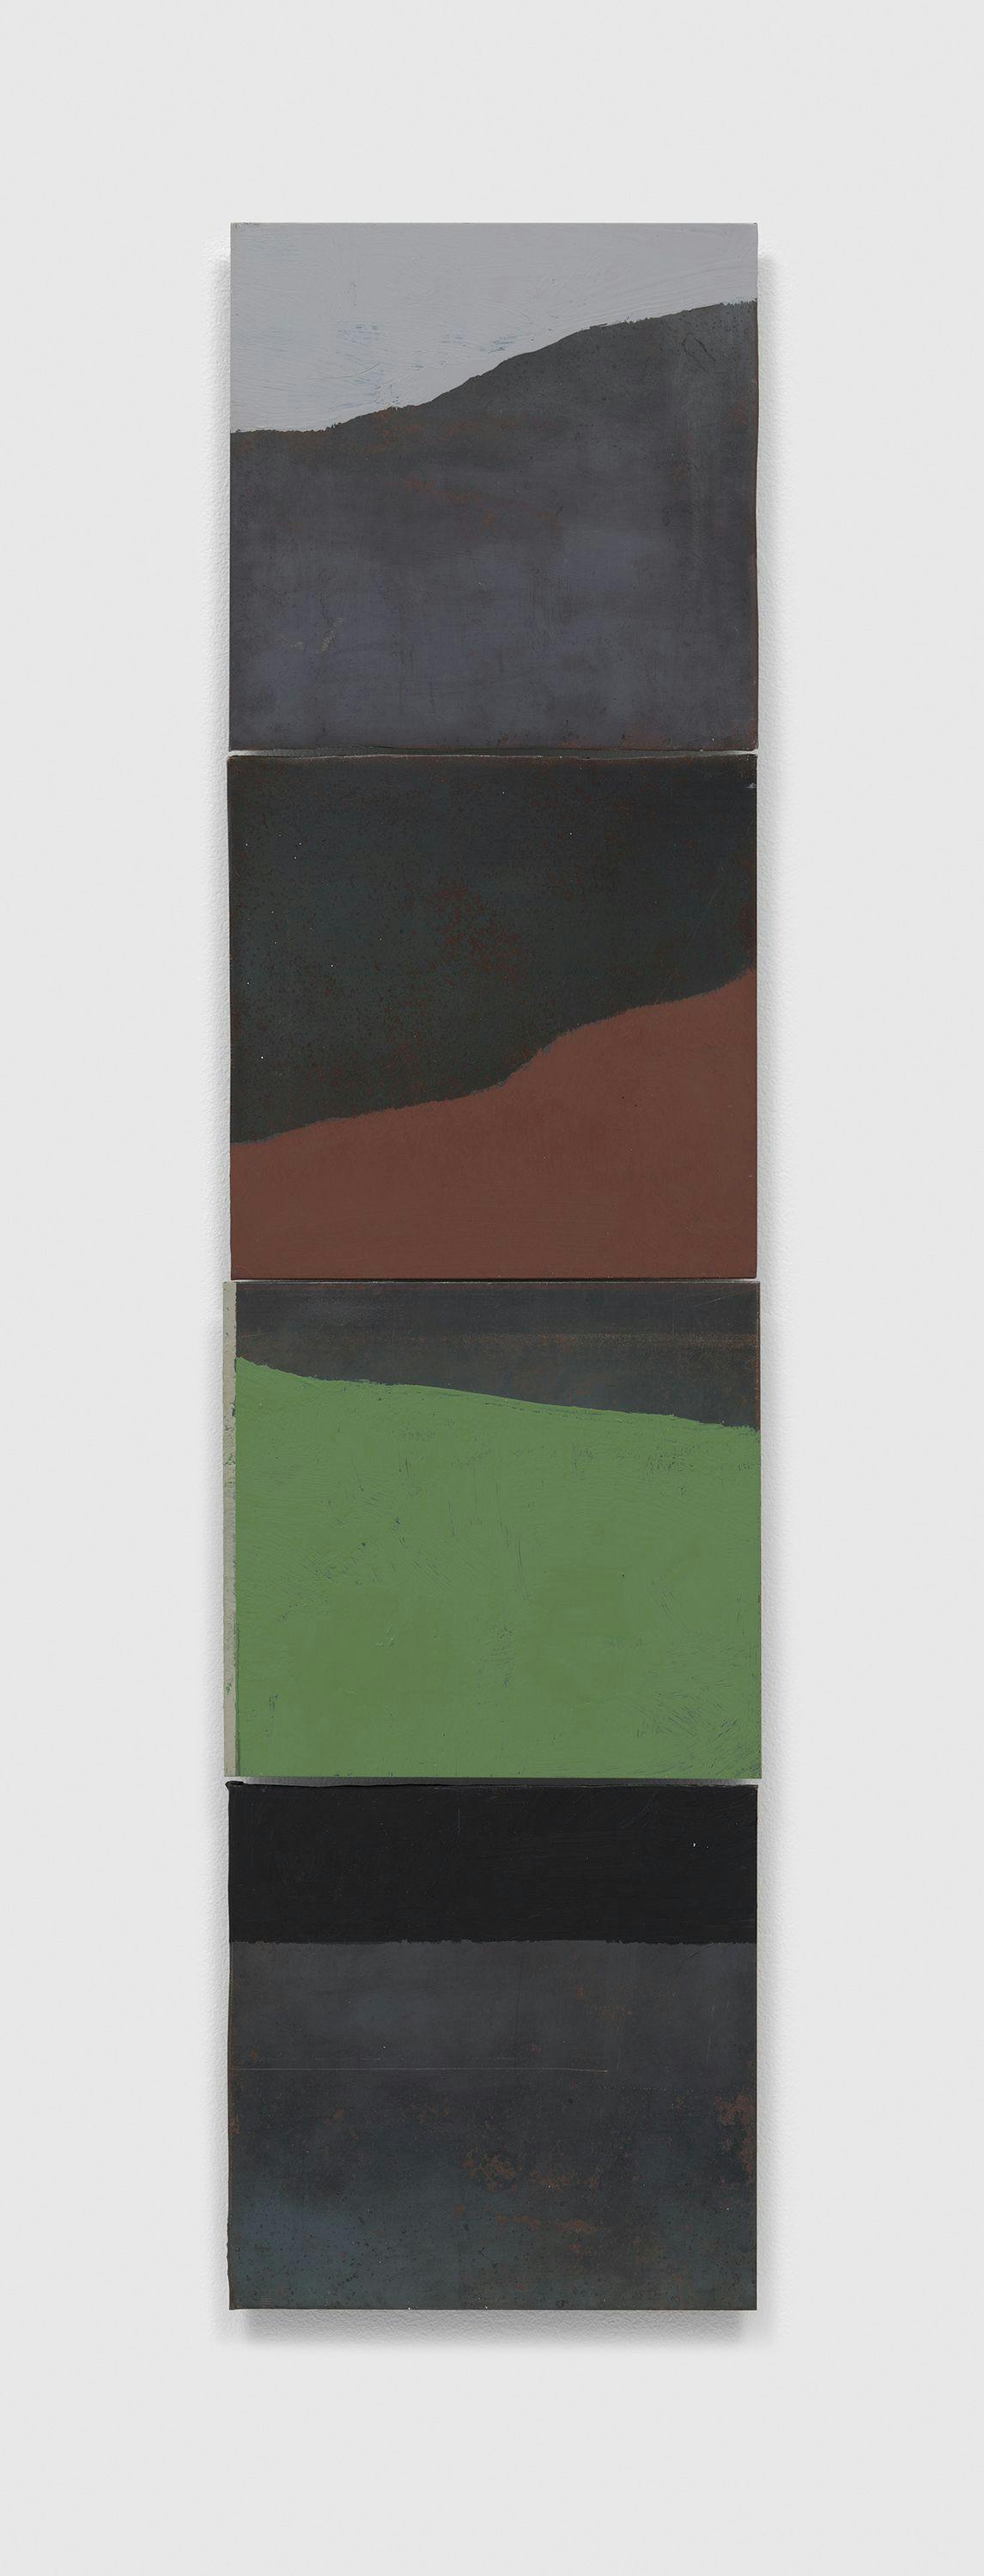 An untitled 4-part painting on steel by Merrill Wagner, dated 2009.